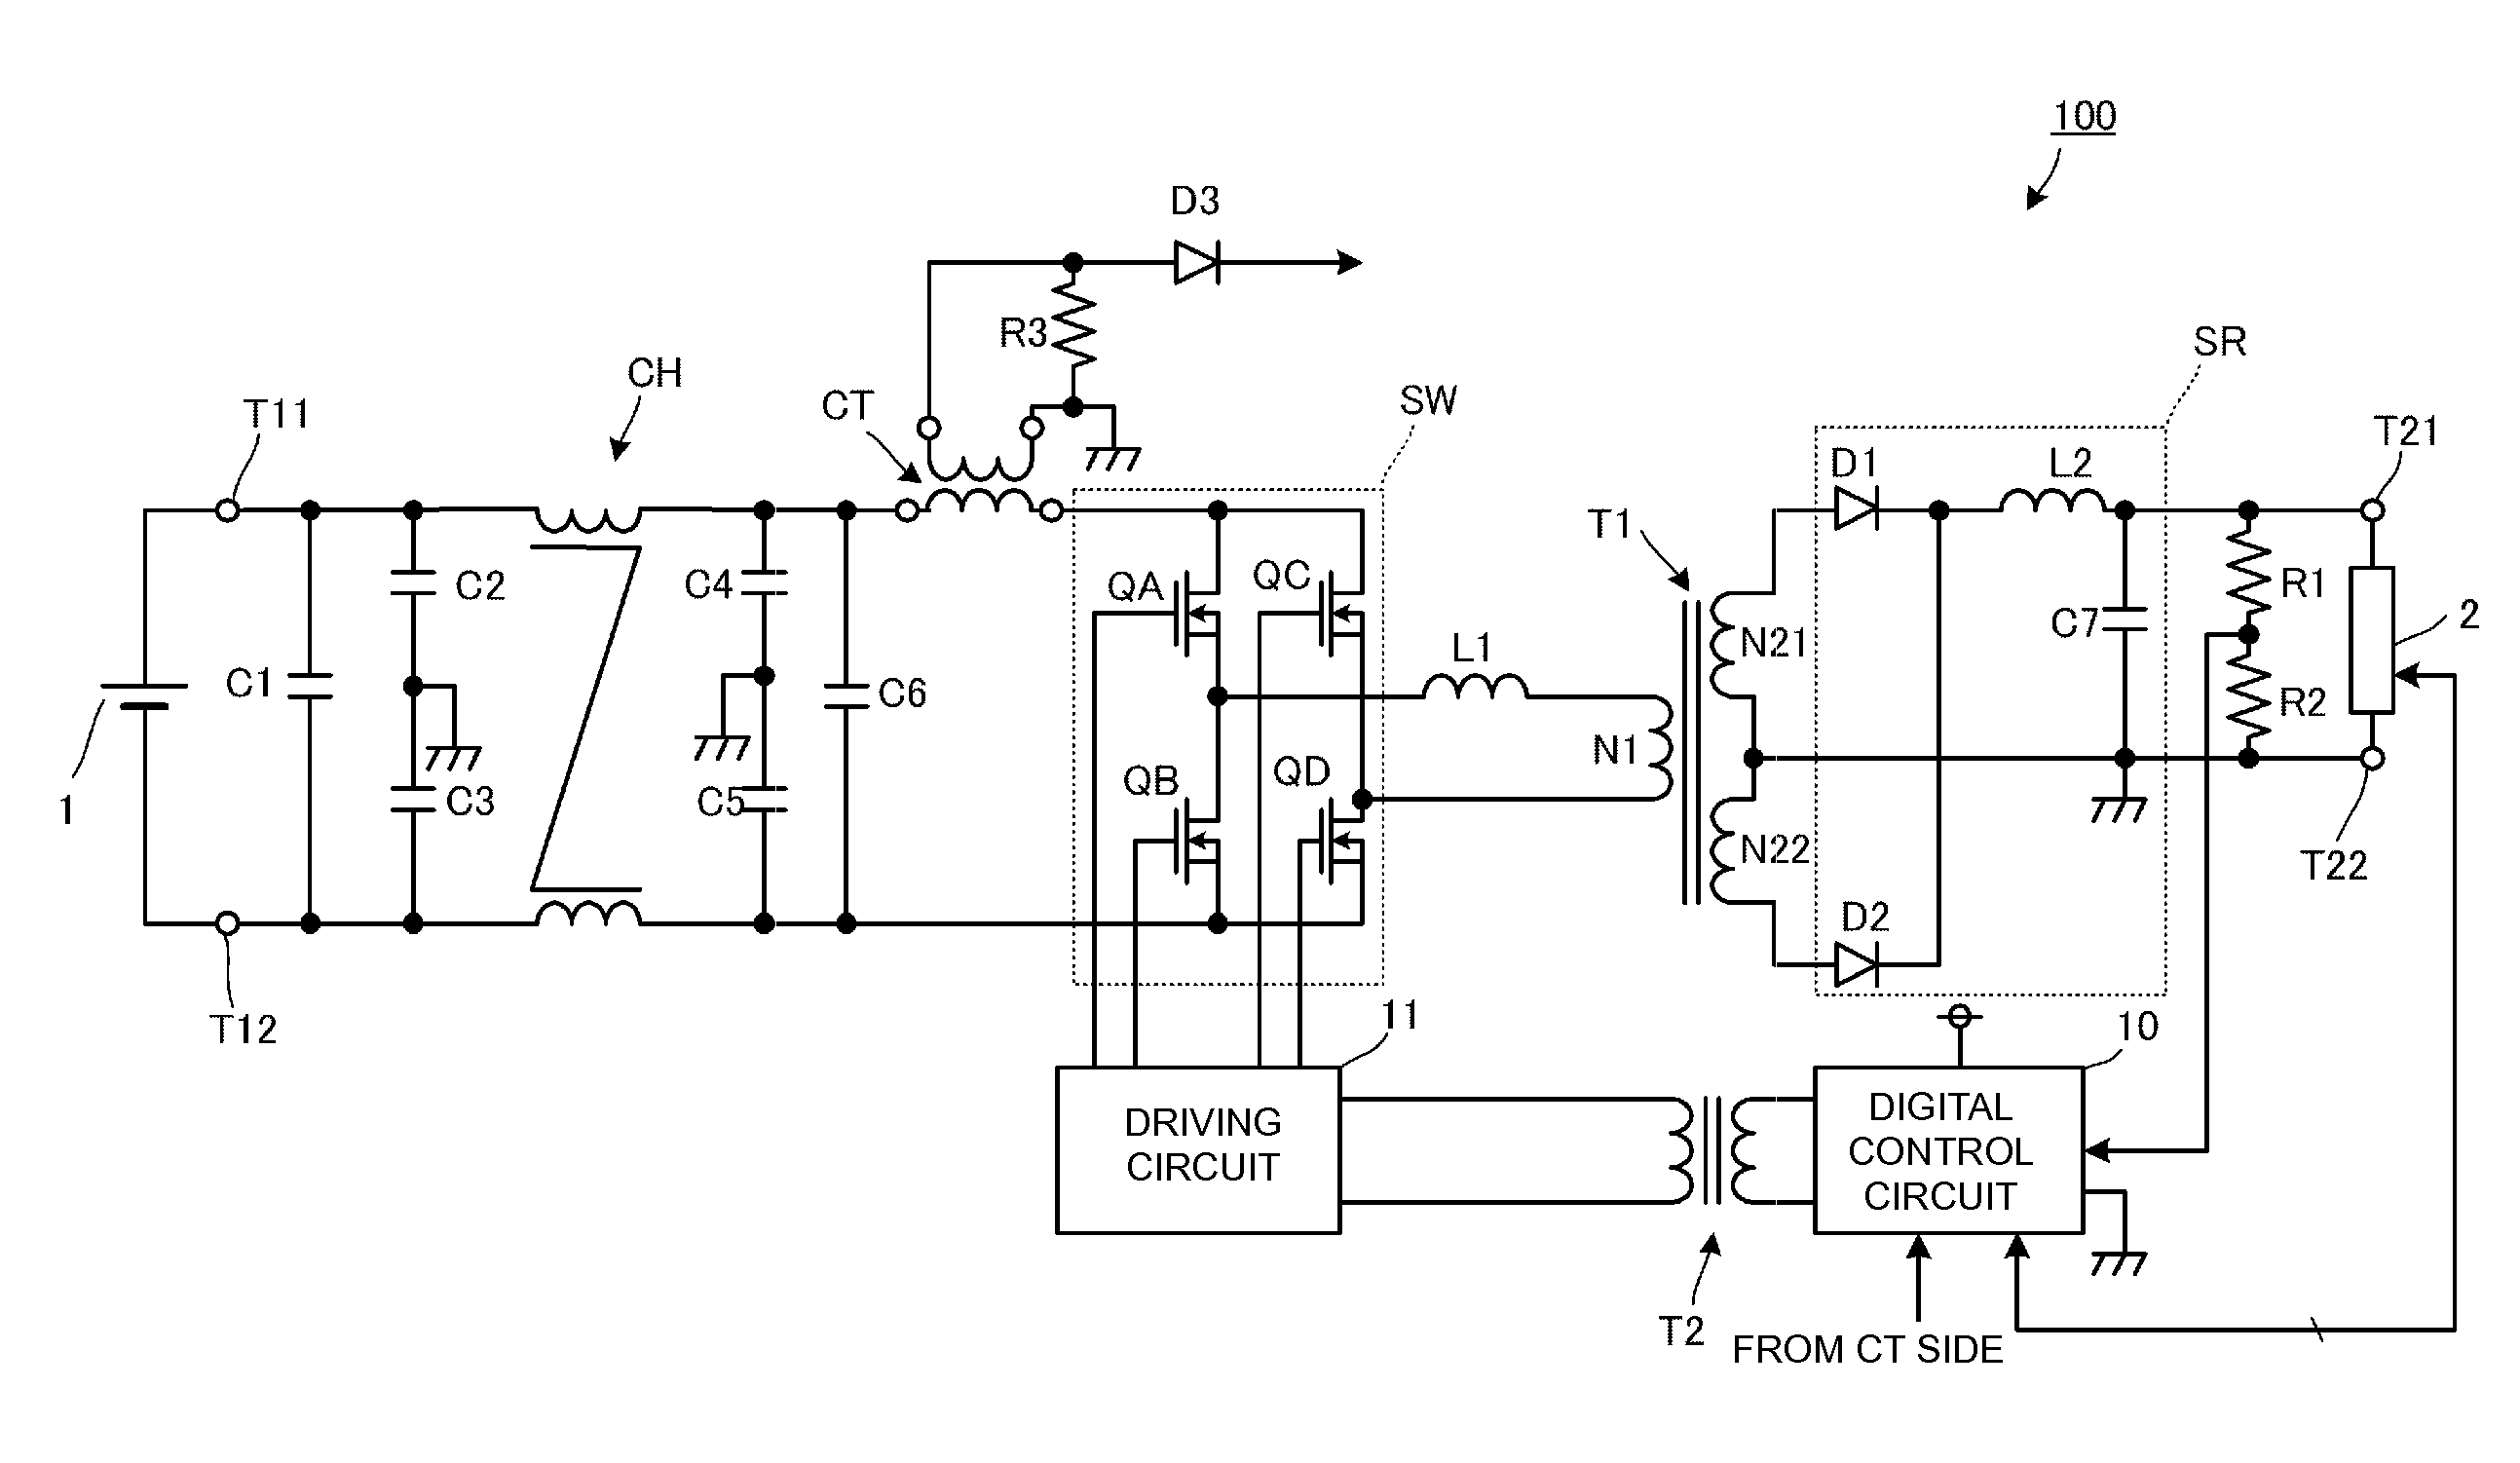 Isolated DC-DC converter